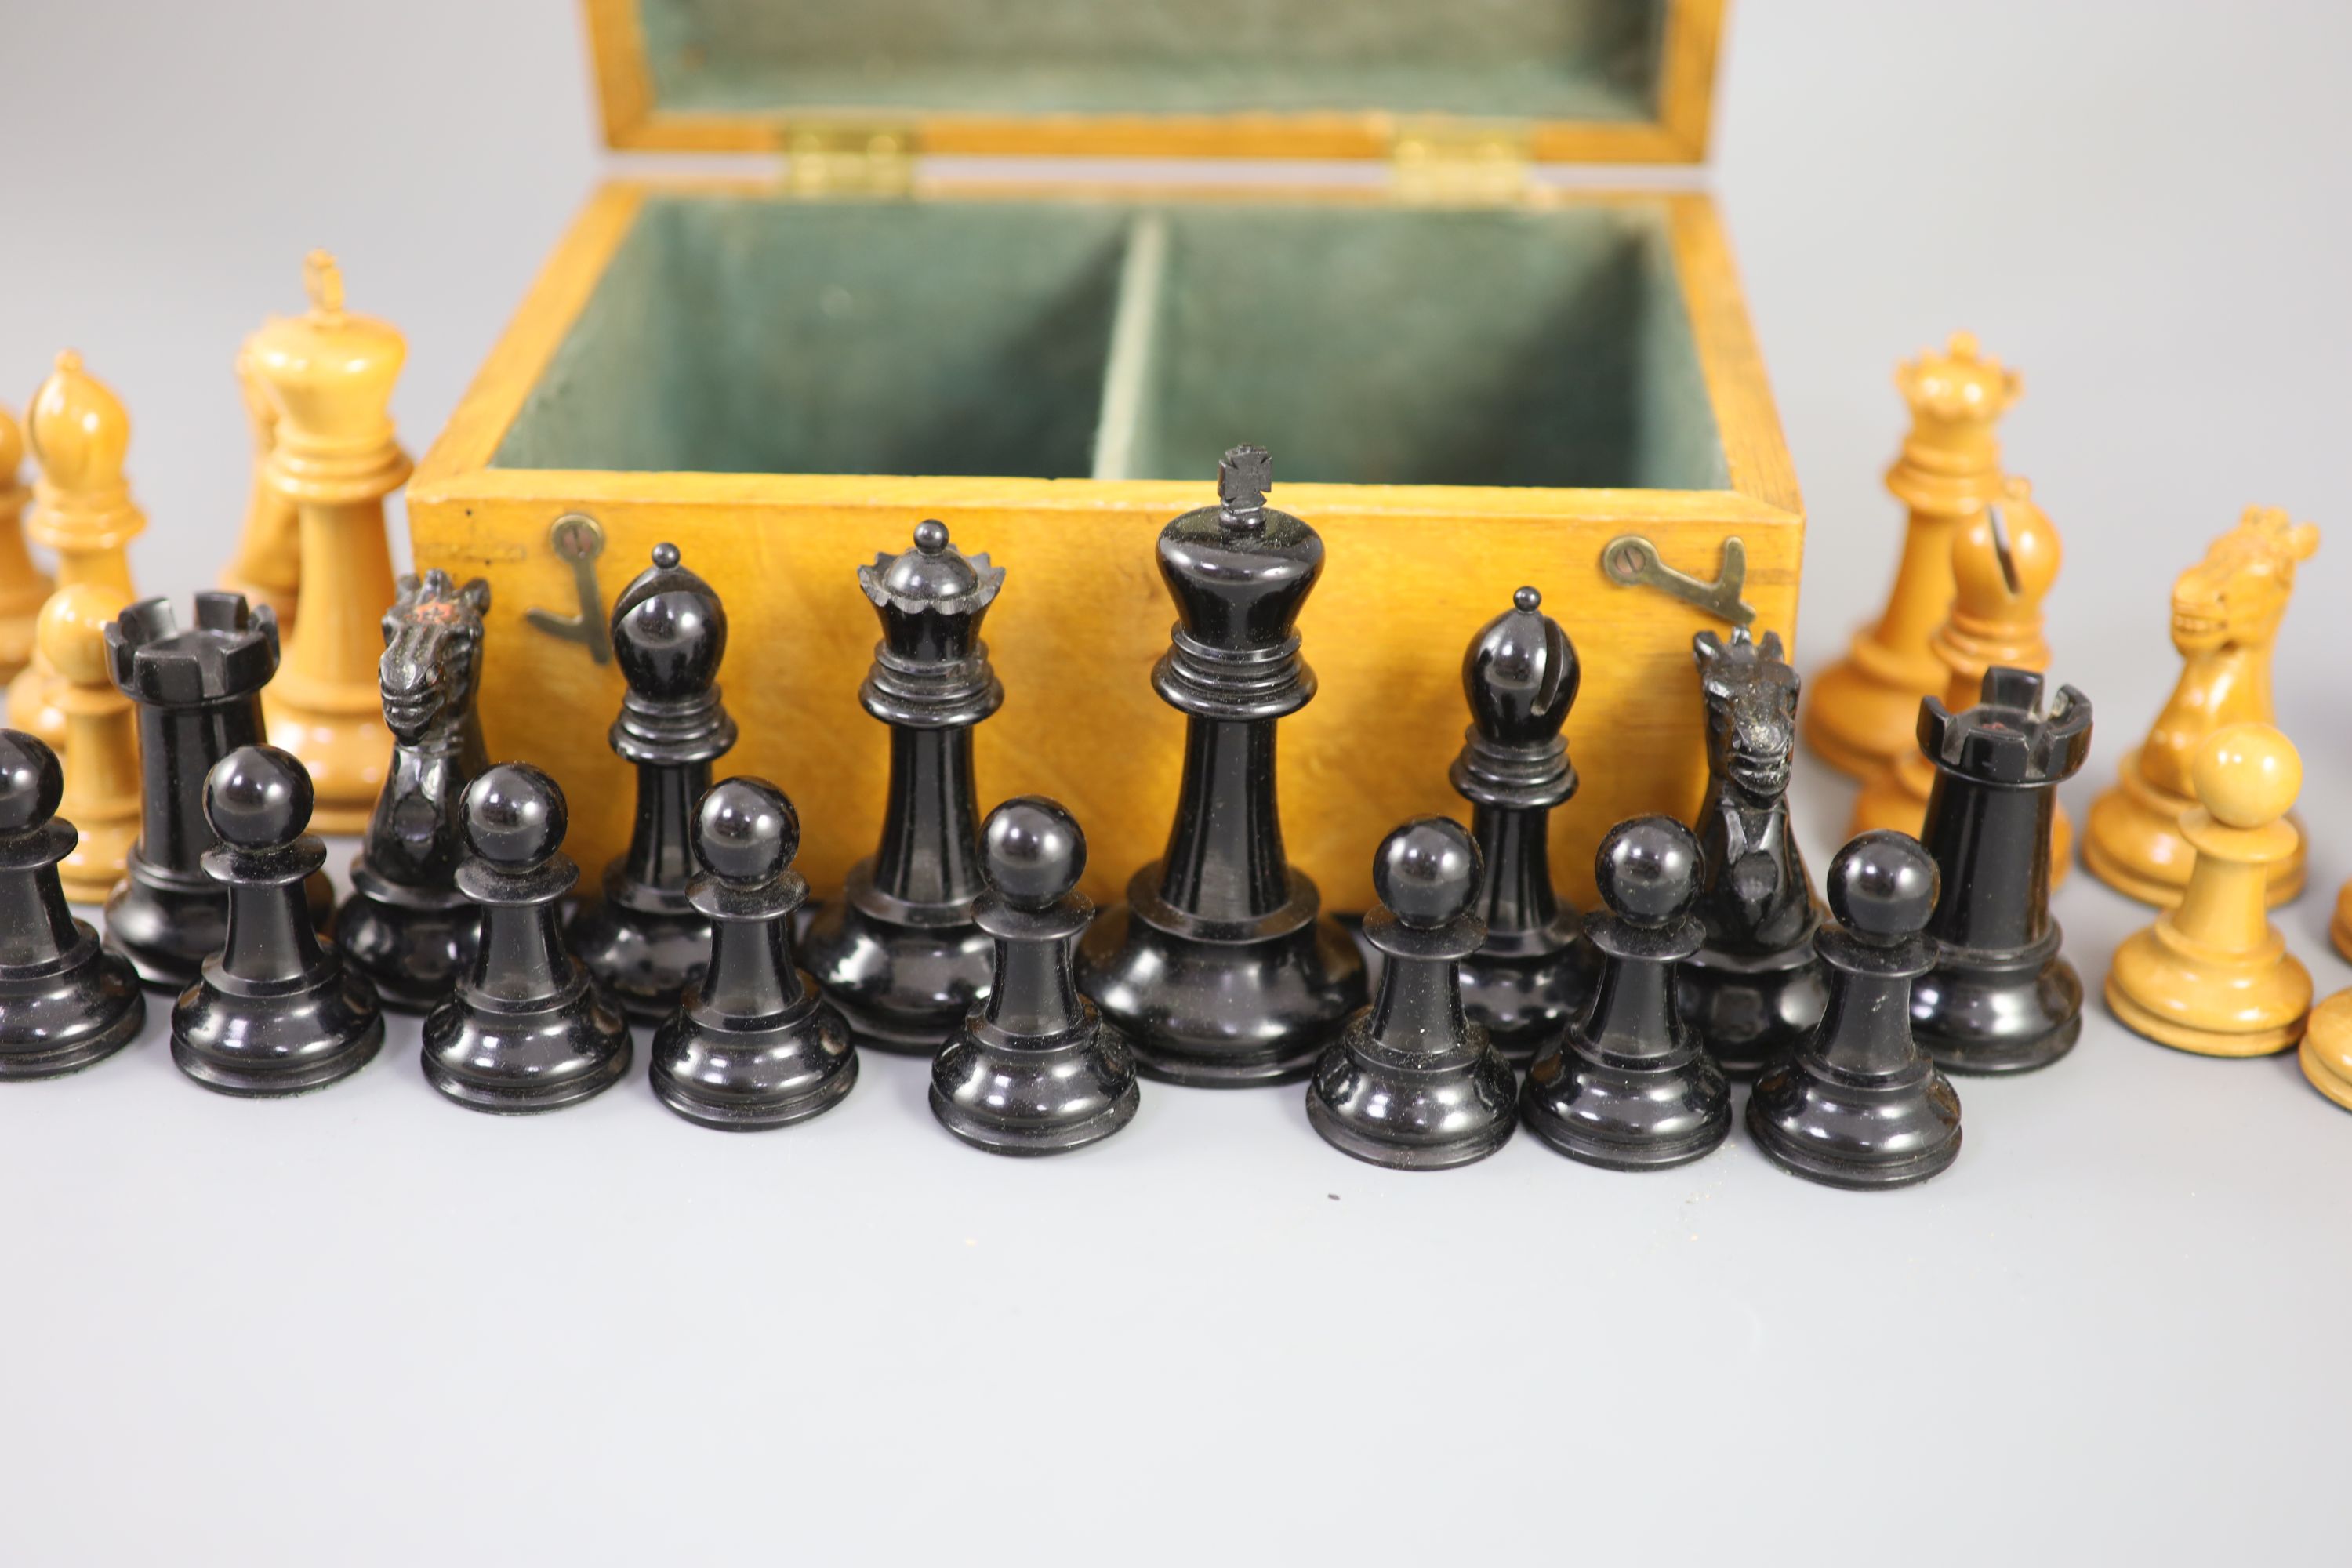 A Jaques & Son Staunton 3 1/2 boxwood and weighted chess set in original golden oak box, c.1910, 8 x 5.75 x 3.5in.